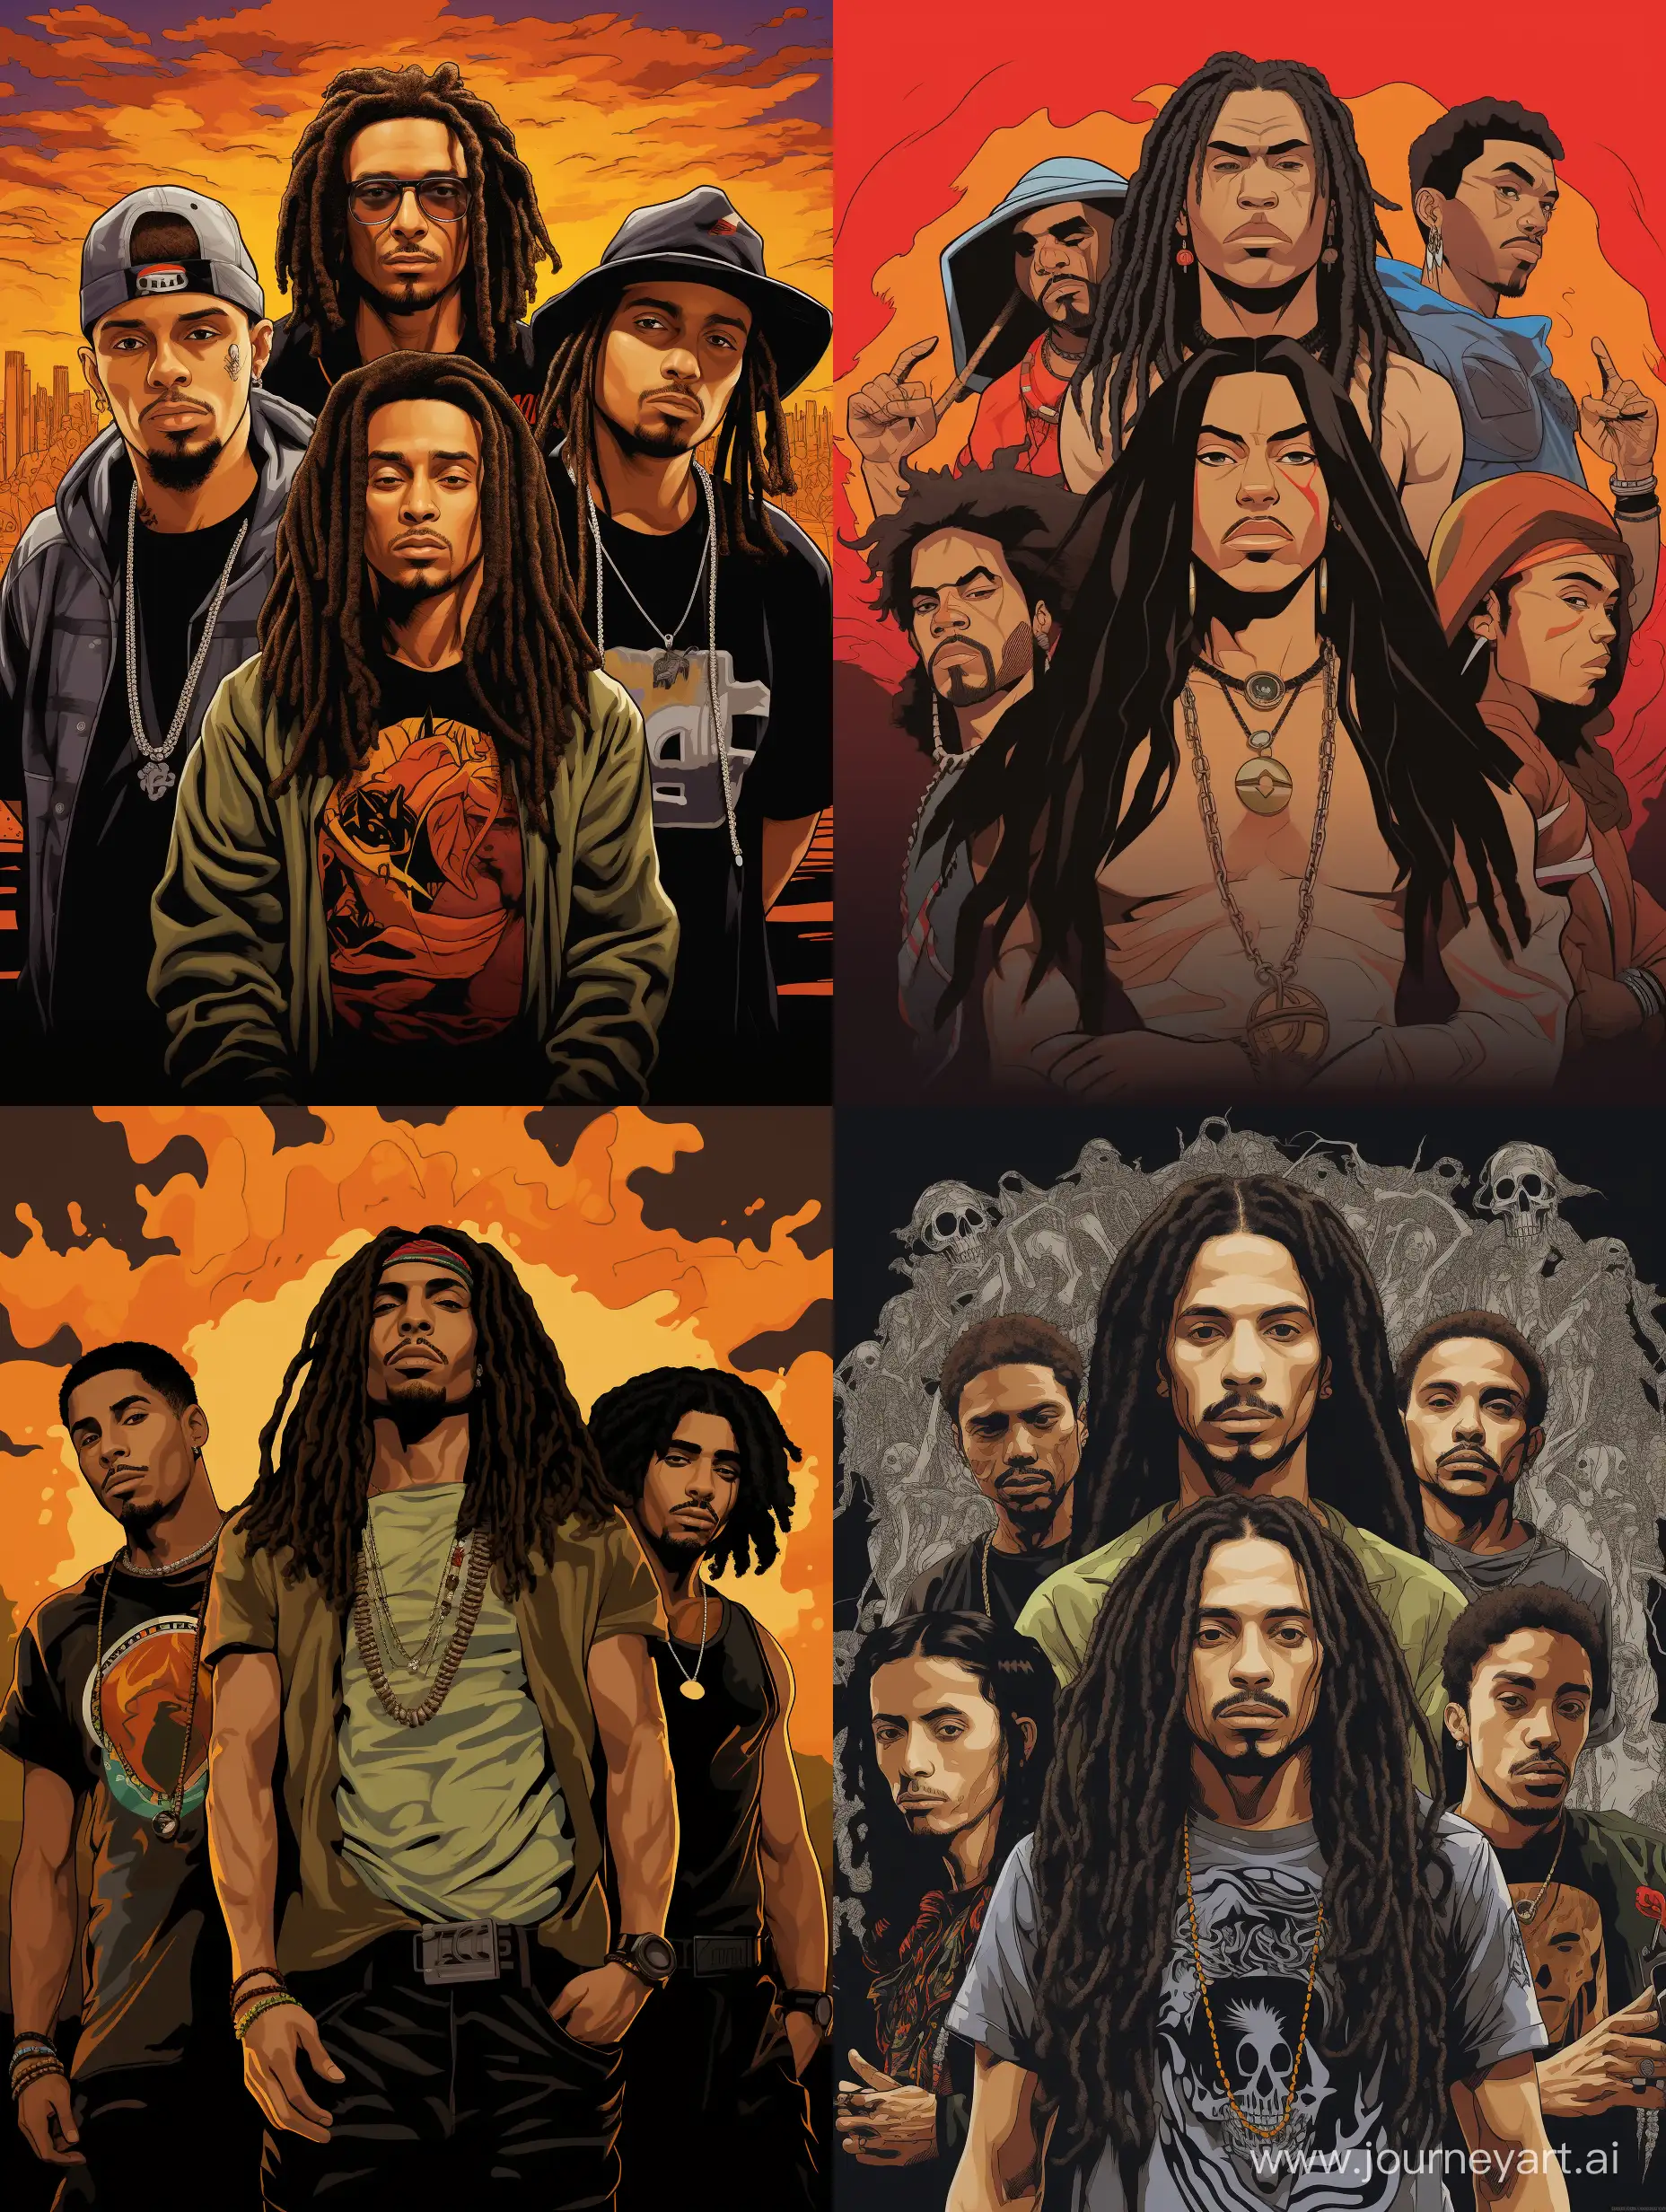 hip hop poster of the group FILHOS DO KAOS. Two latinos. with long and twisted hairs. There are two brothers in the rap group. The older brother havfe 28 years old and the youngest have 21. The older is a black-indigenous men and the youngst is more ligth in the skin. they are somenthing like the RUN THE MC or N.W.A groups of rap. the brothers can not be straigth black mens.  Write on the frame with grafite letters the phrase "Filhos do Kaos".
